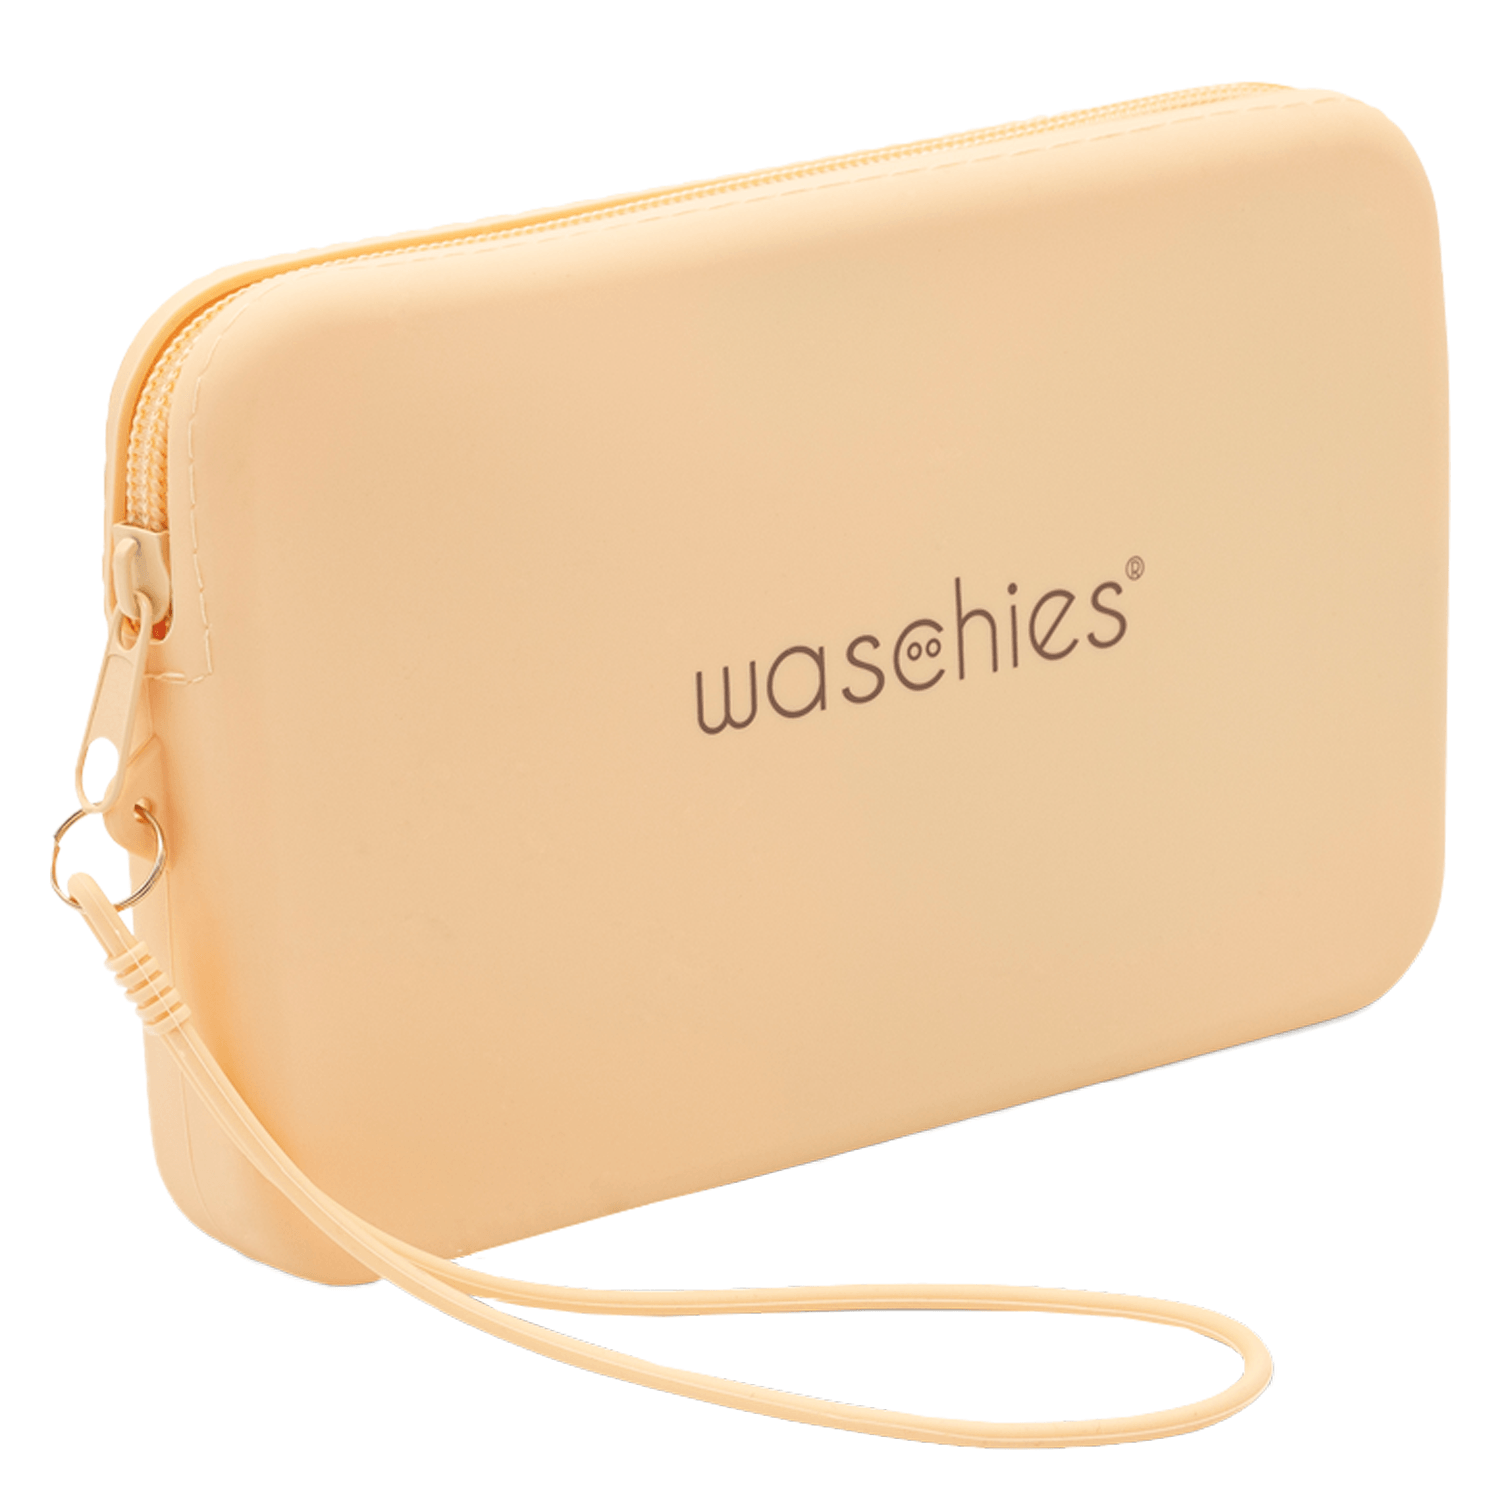 Product image from Waschies Faceline - Travel Bag Sand Edition